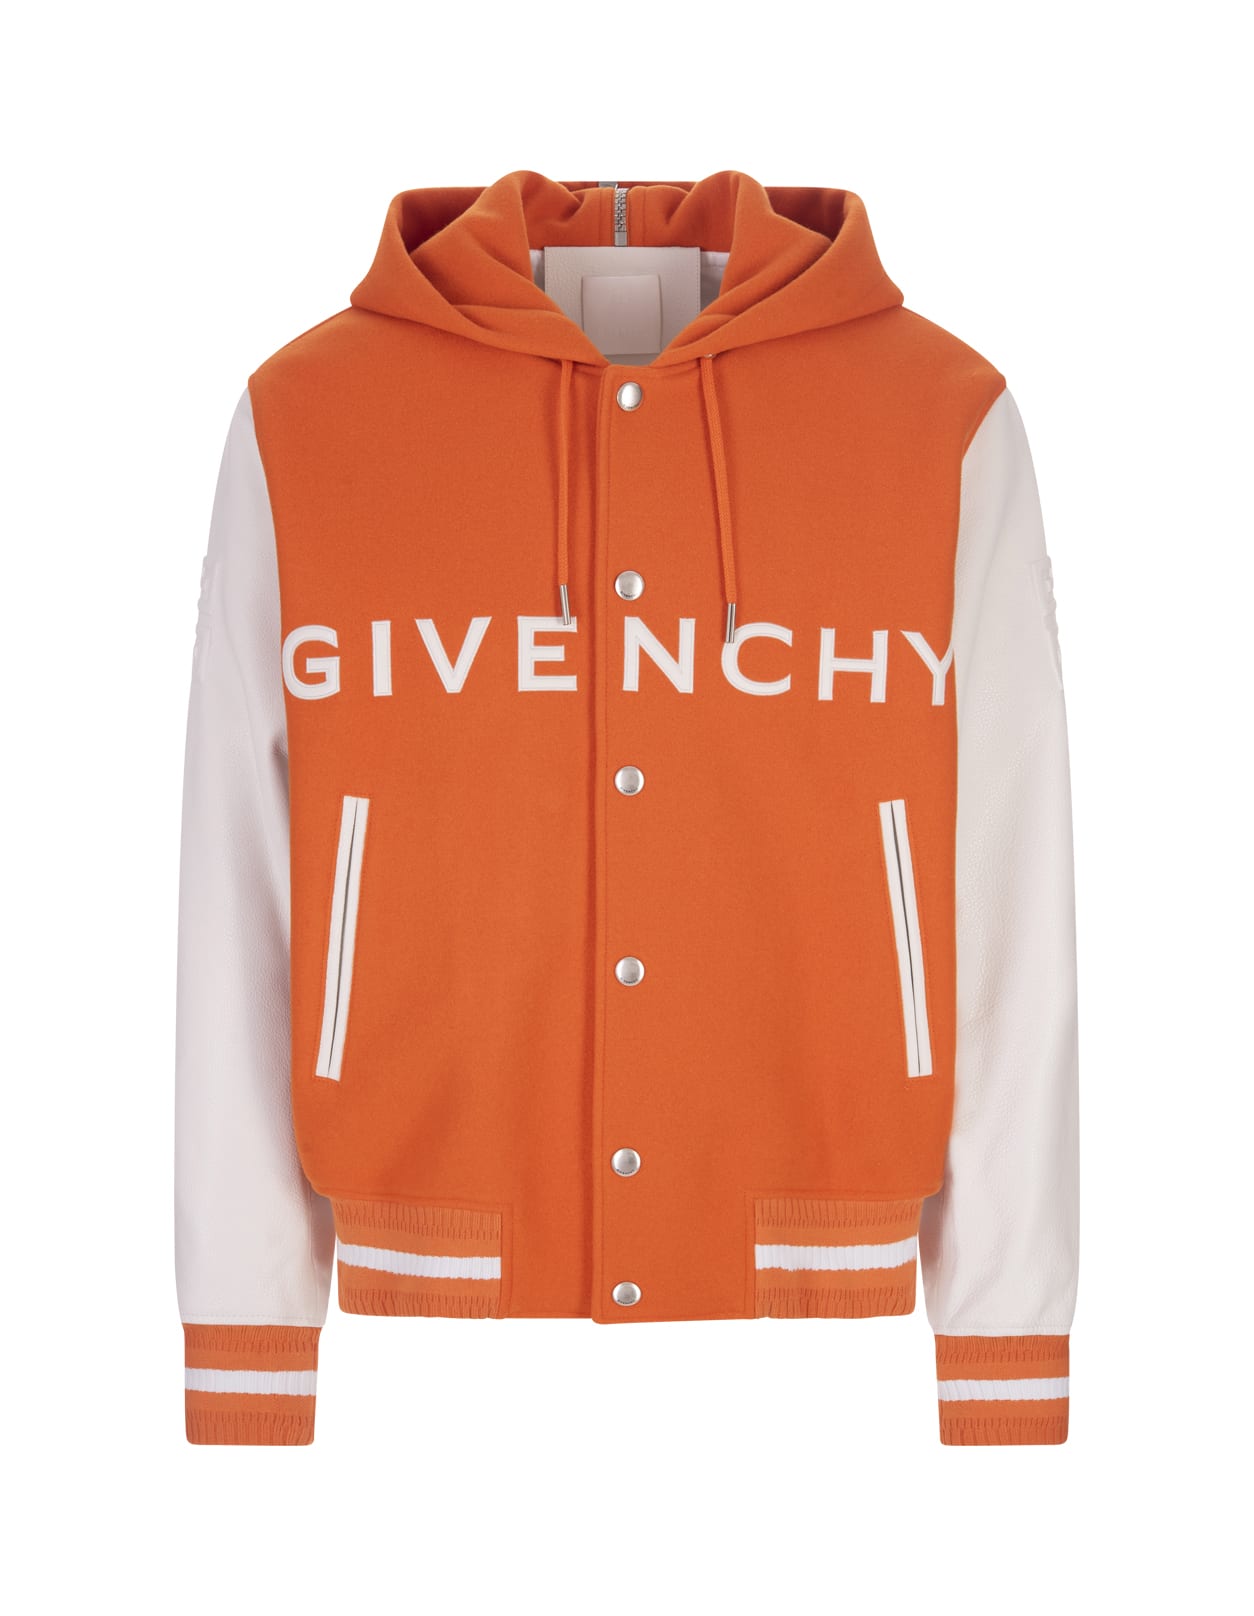 GIVENCHY ORANGE HOODED VARSITY JACKET IN WOOL AND LEATHER